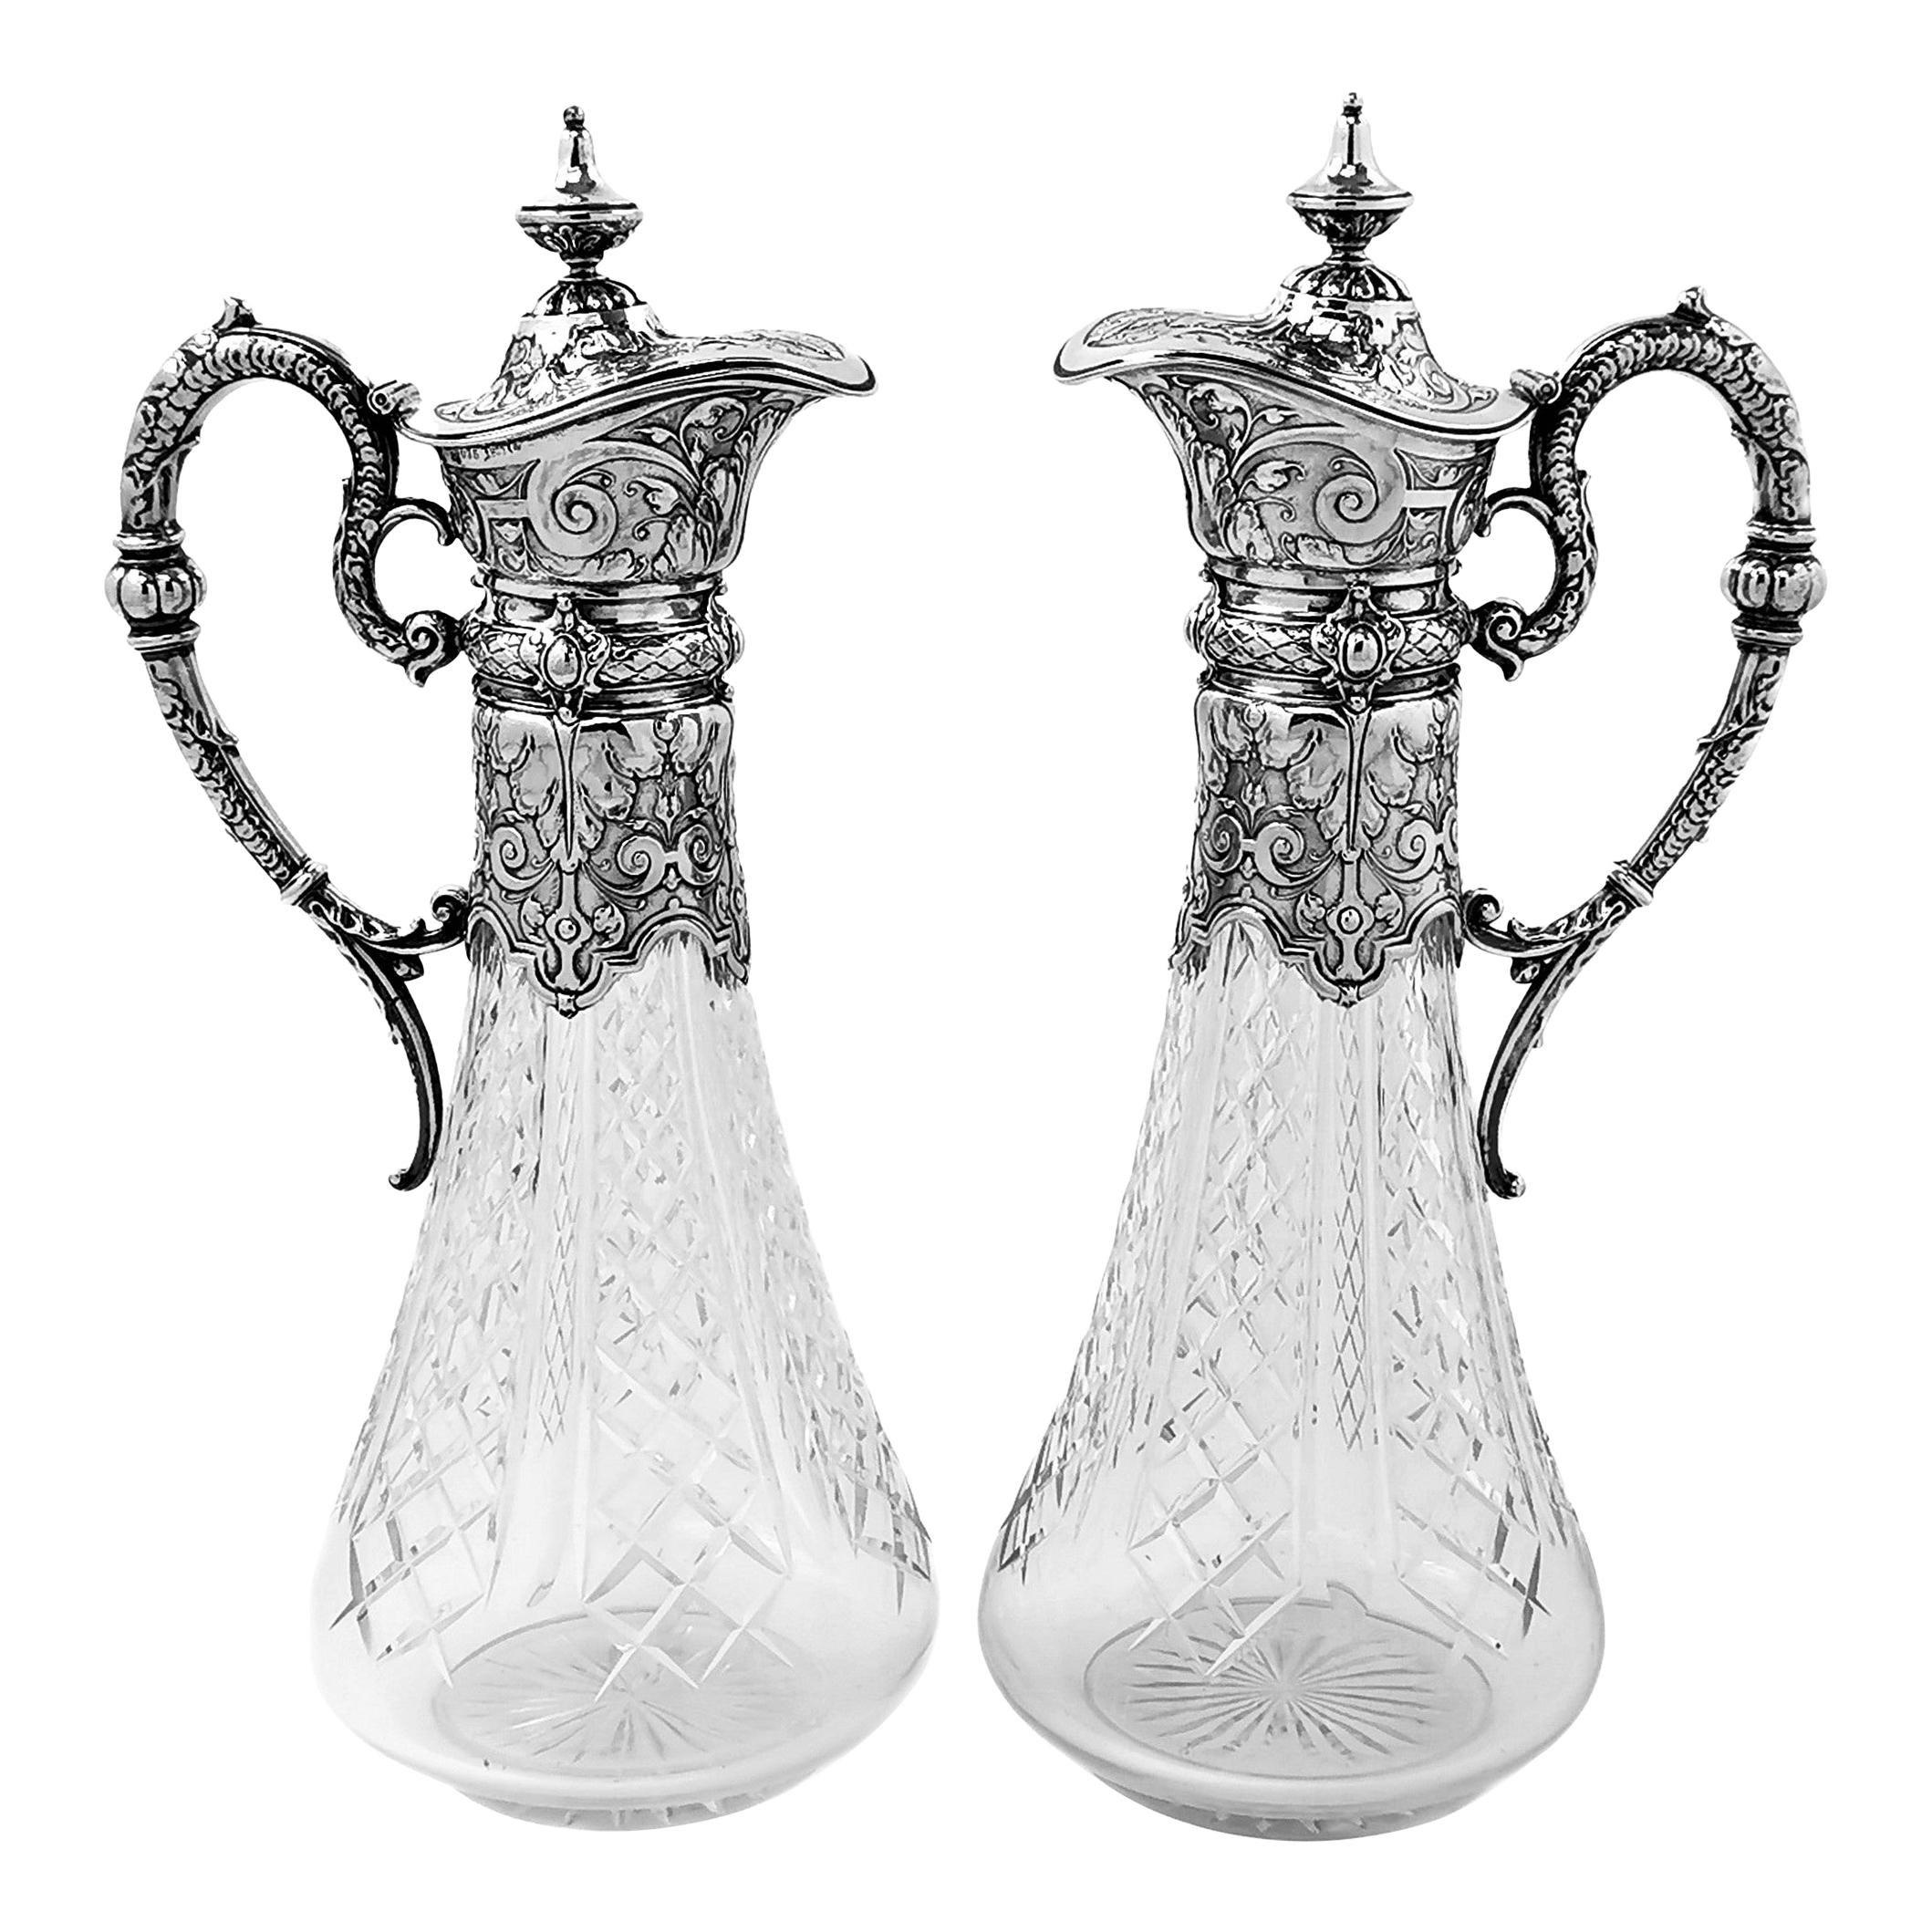 Pair of Antique German Silver and Cut Glass Claret Jugs Wine Decanters c 1890